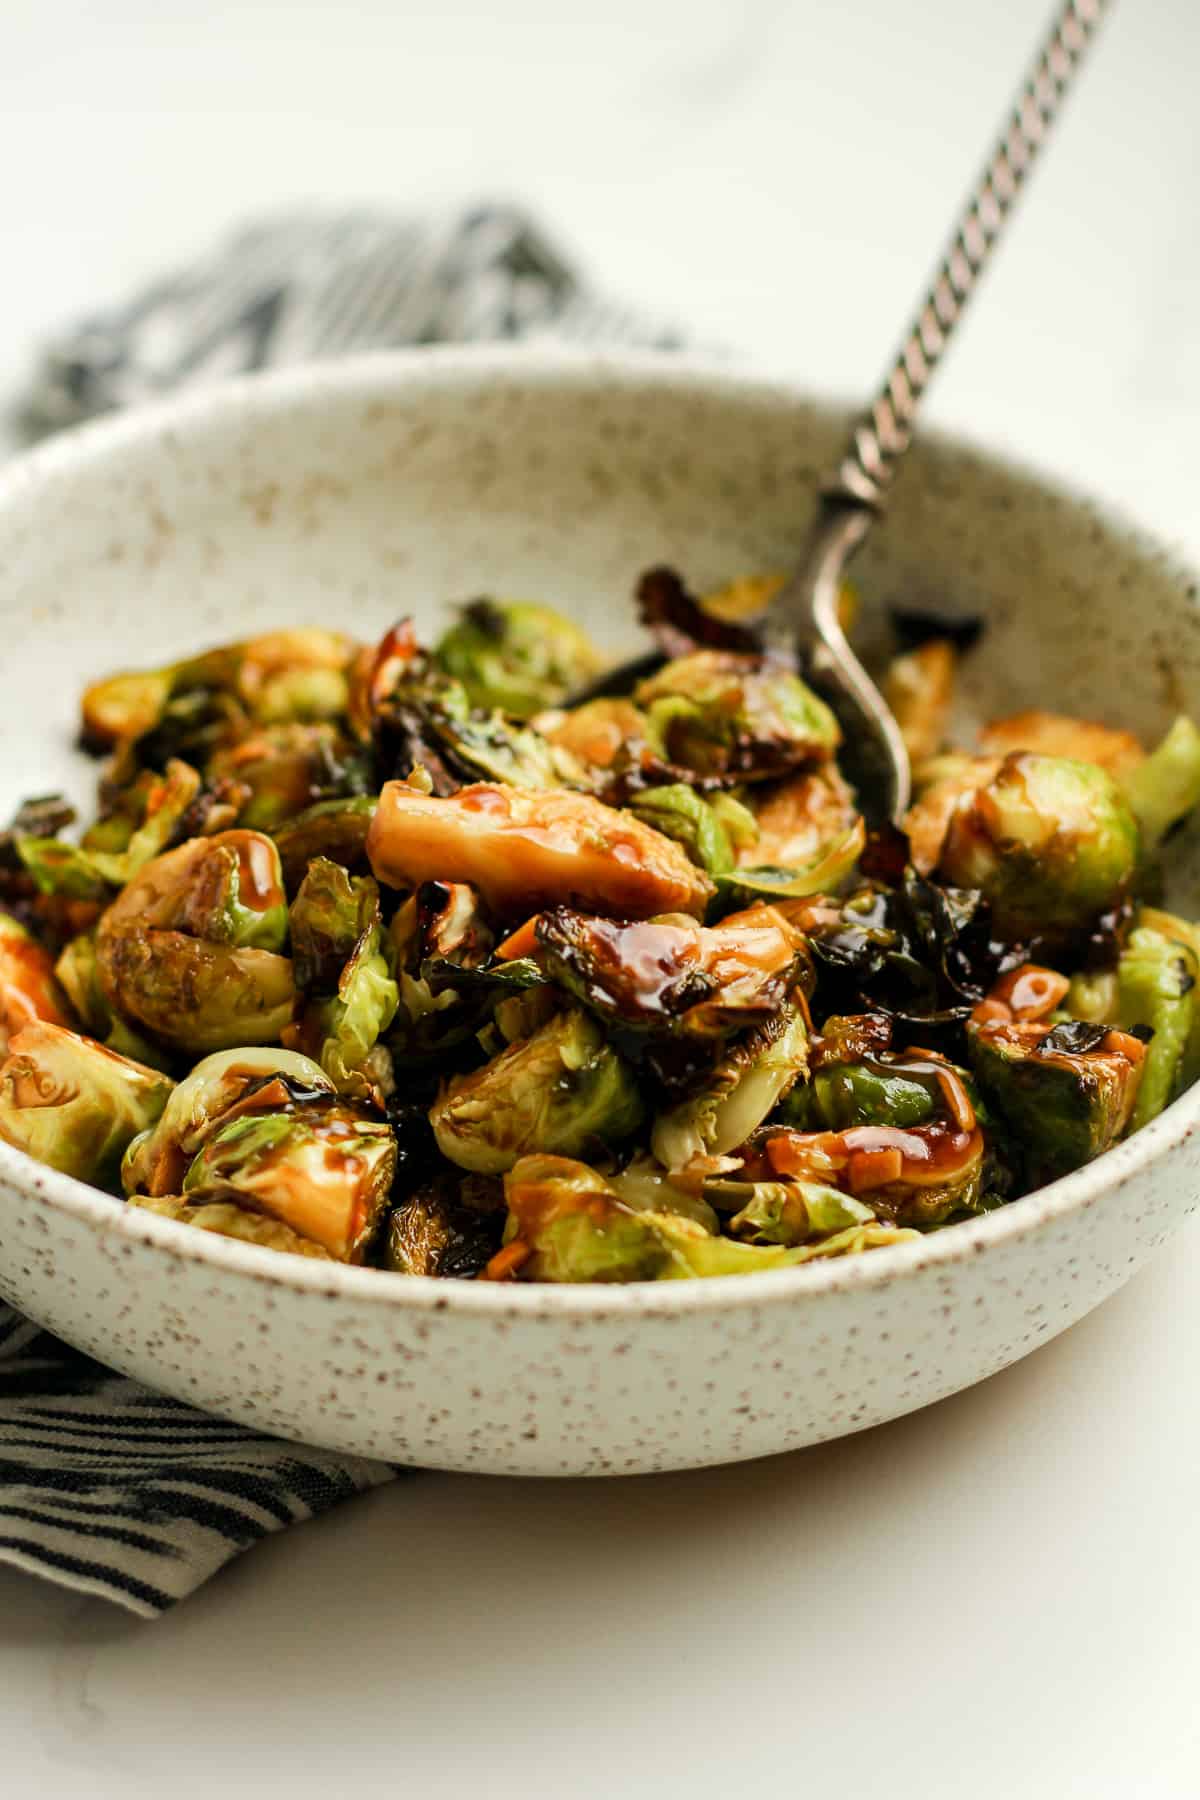 Side shot of the Brussels sprouts with a spoon.